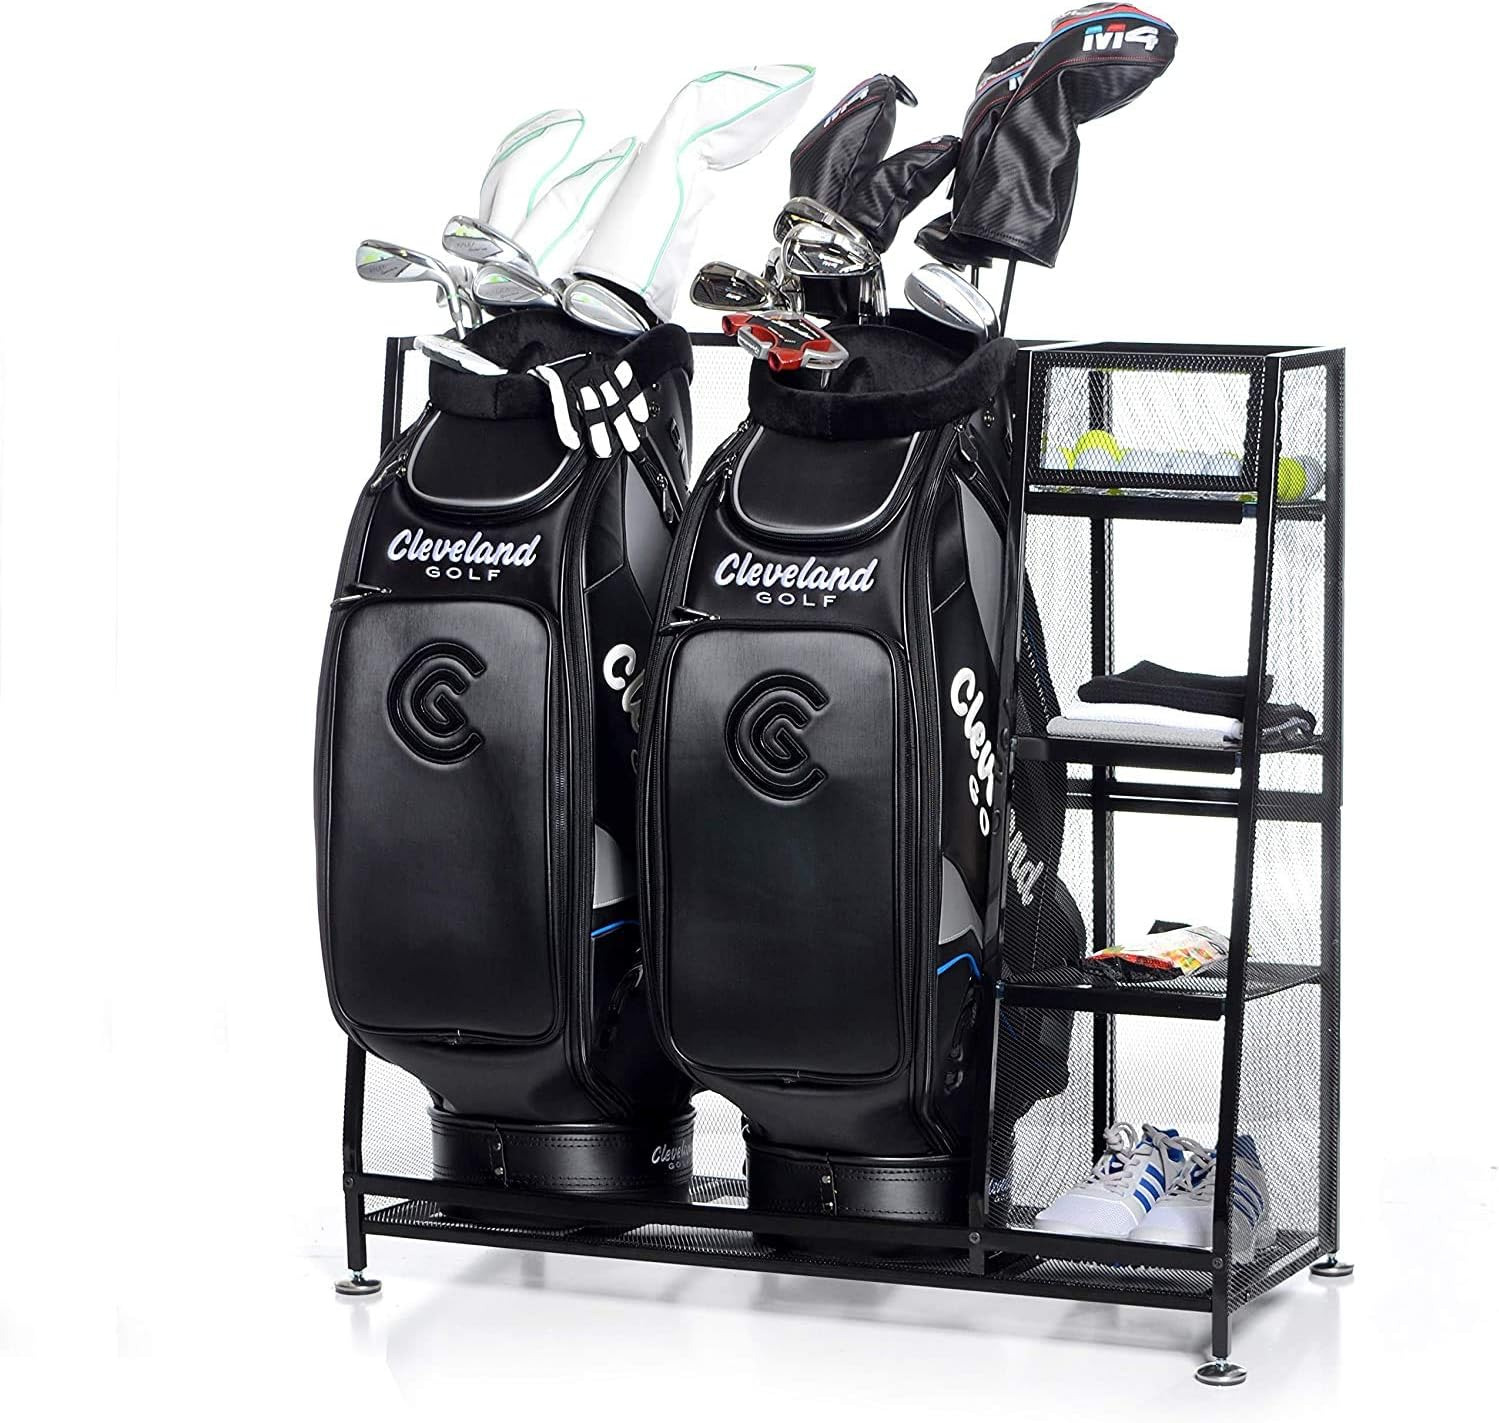 Golf Organizer - Extra Large Size - Fit 2 Golf Bags and Other Golfing Equipment 